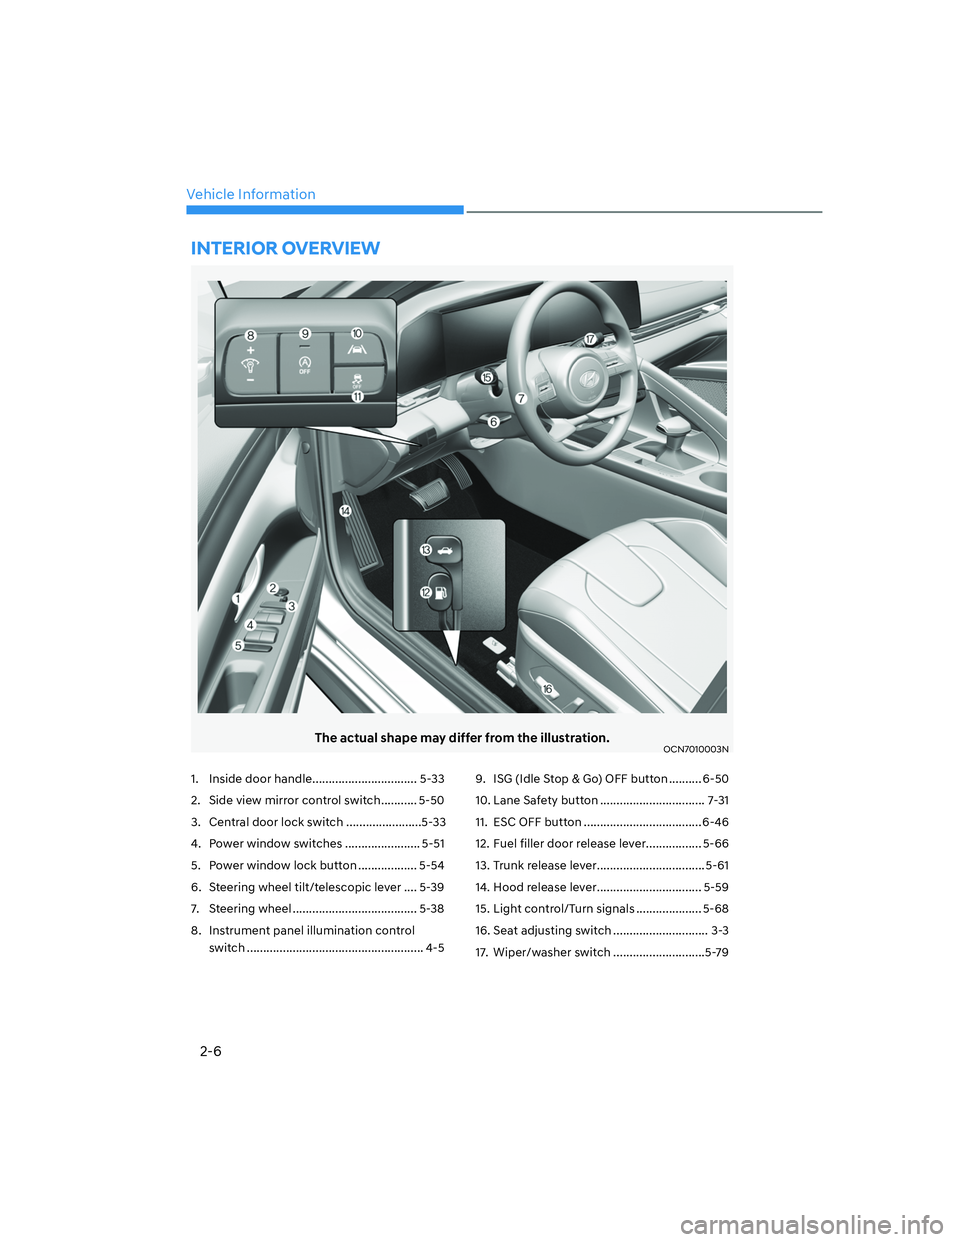 HYUNDAI ELANTRA 2022  Owners Manual 2-6
Vehicle Information
The actual shape may differ from the illustration.OCN7010003N
1.  Inside door handle ................................ 5-33
2.  Side view mirror control switch ........... 5-50
